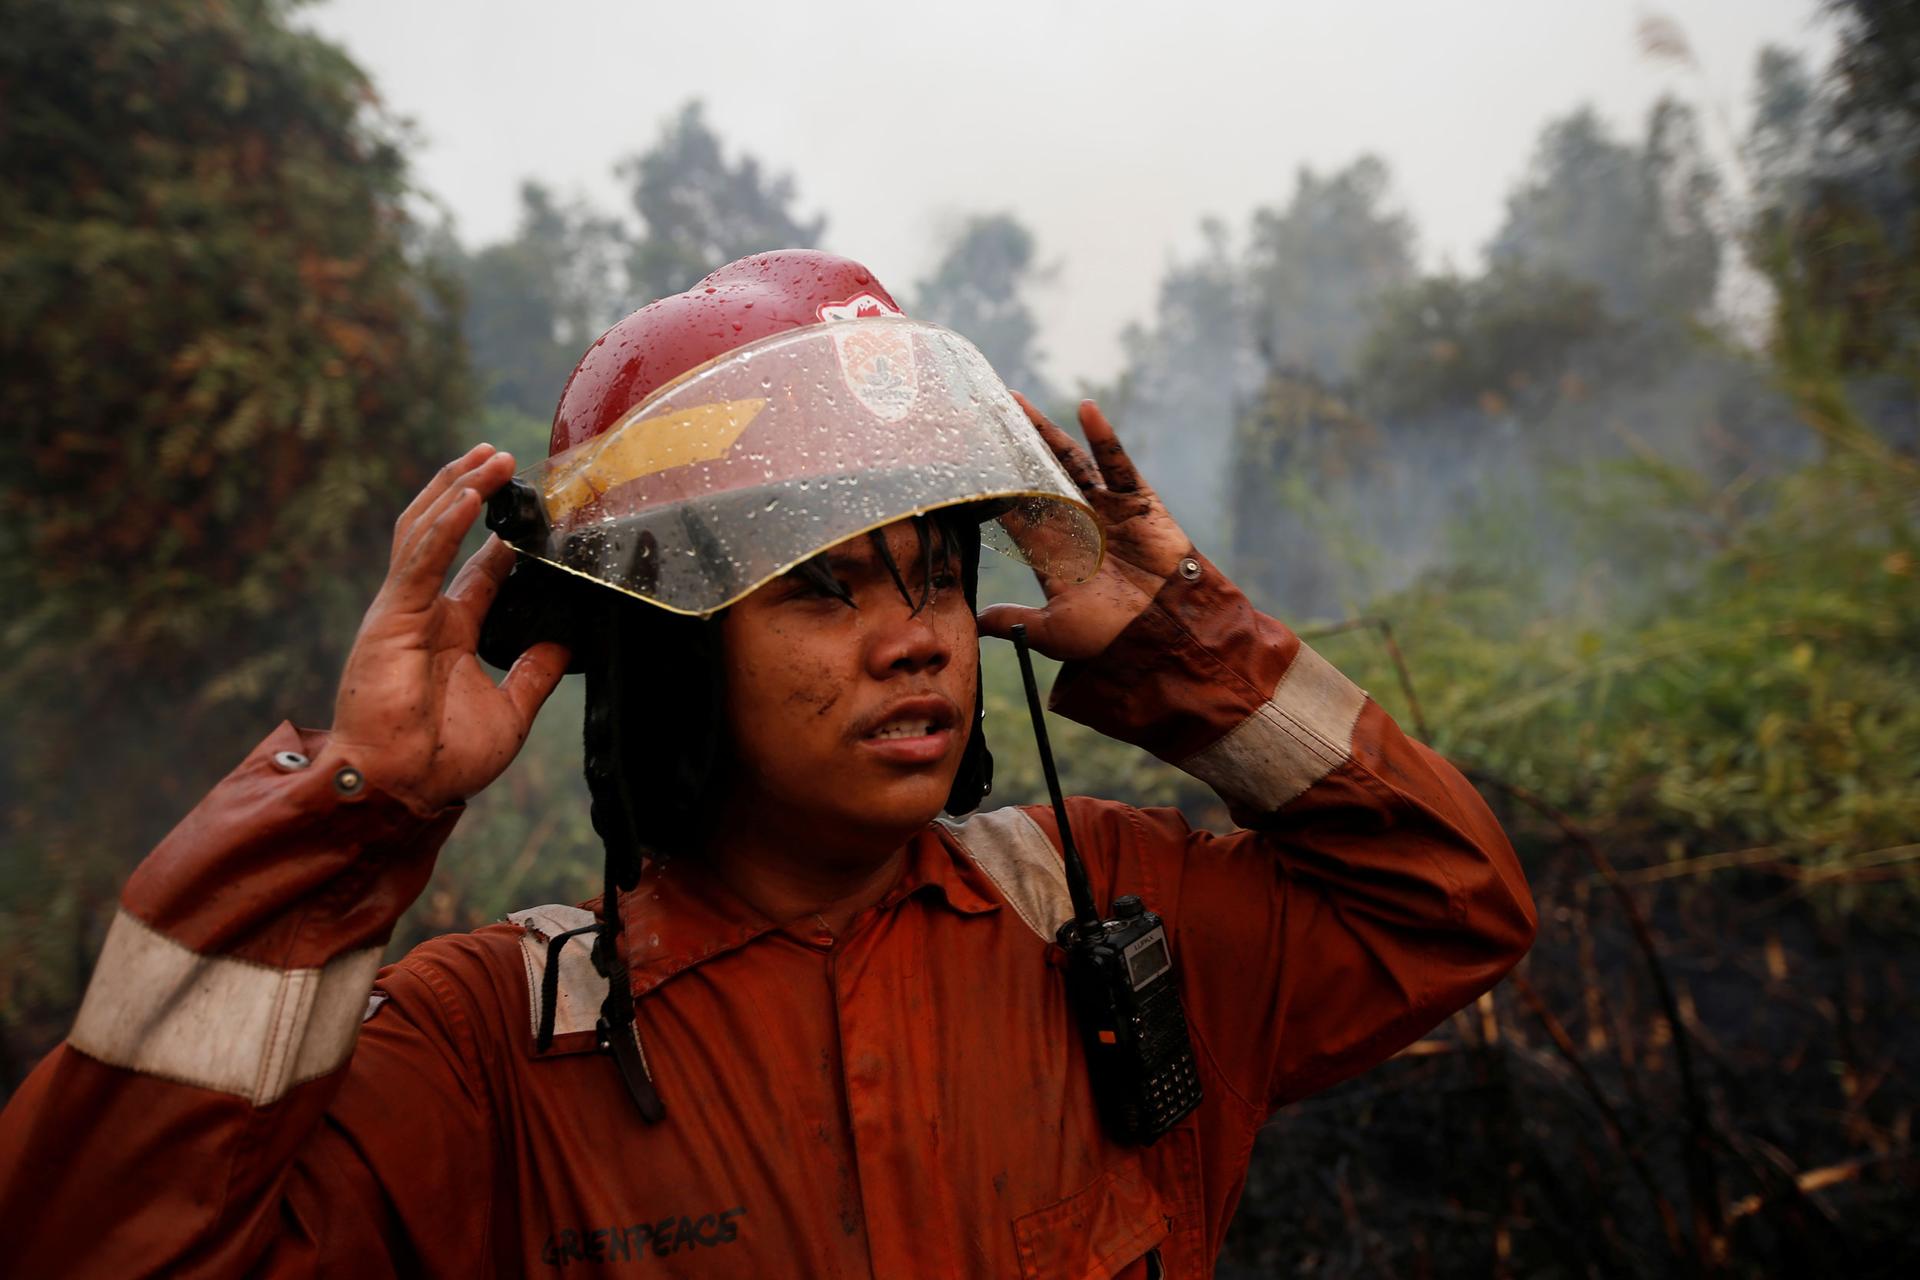 A man is shown with his hands rised to the brim of his fire helmet.